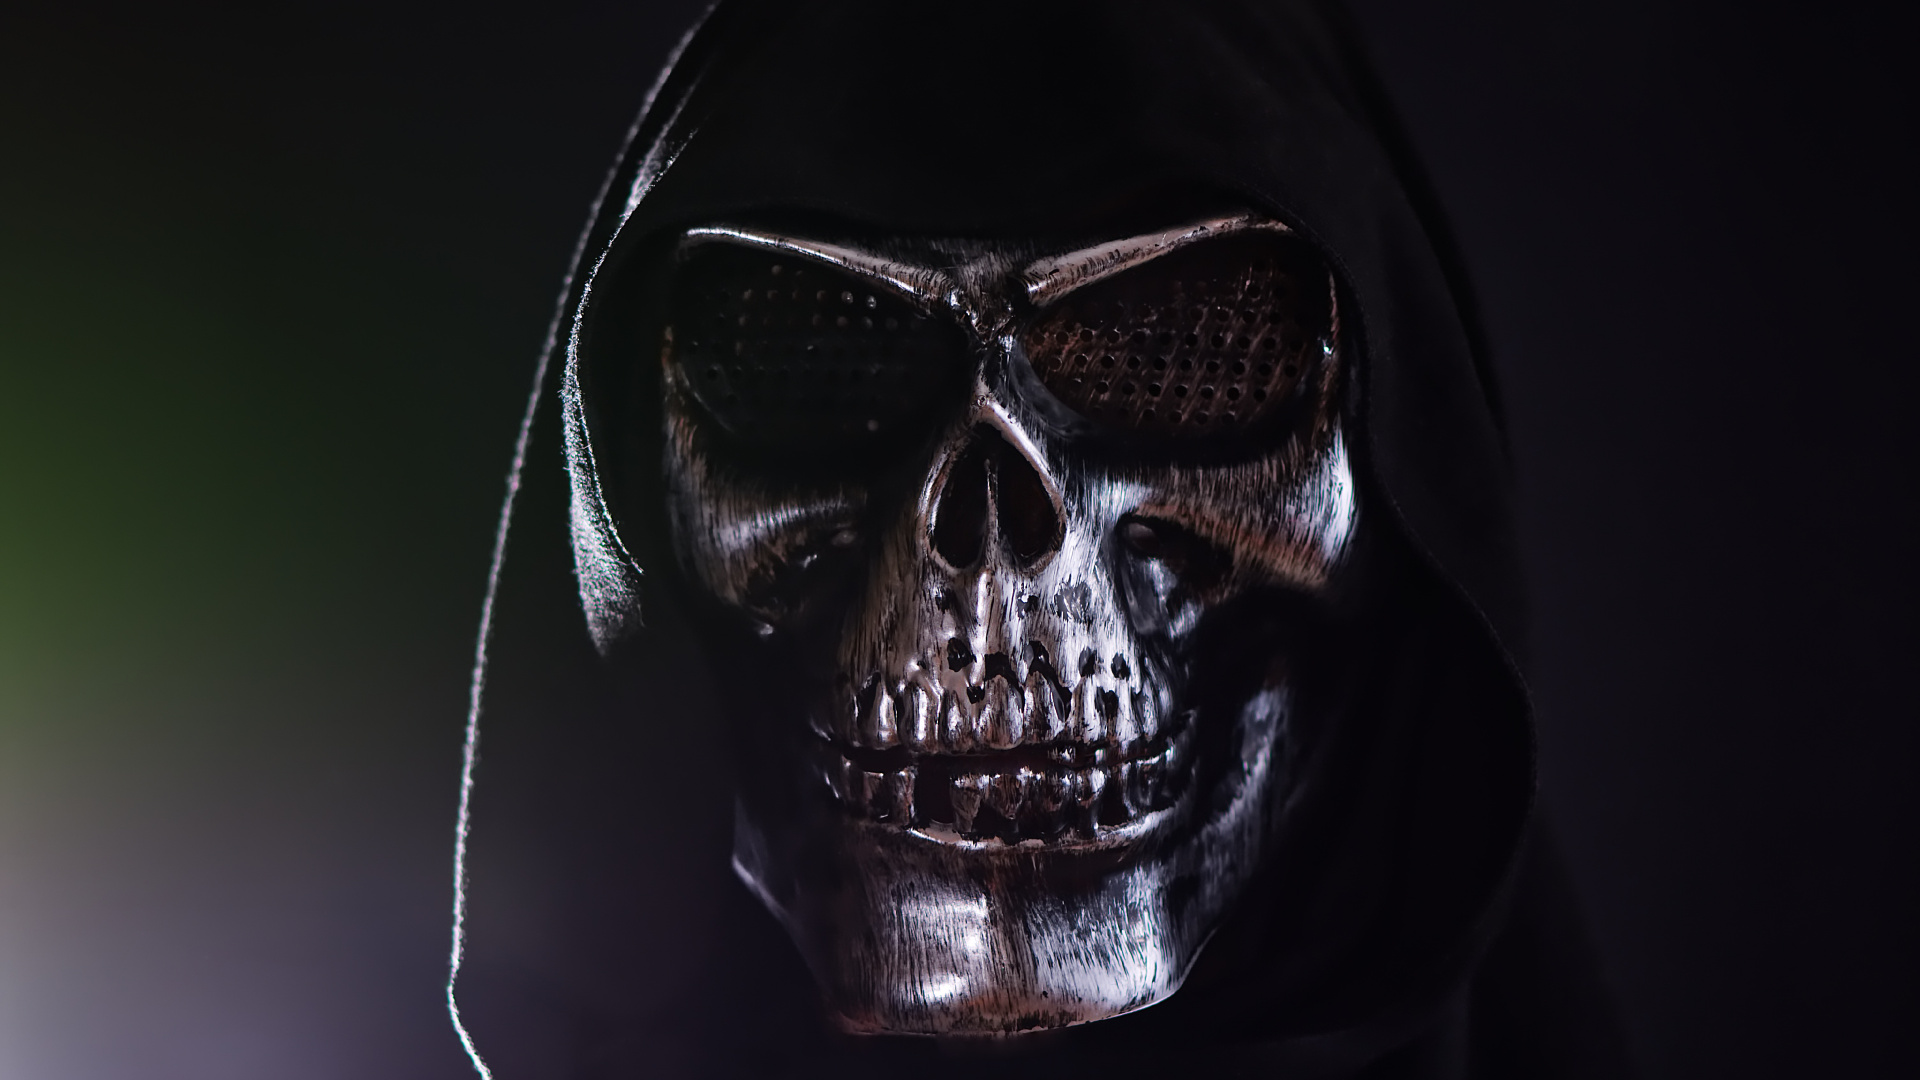 Black and Silver Skull Mask. Wallpaper in 1920x1080 Resolution